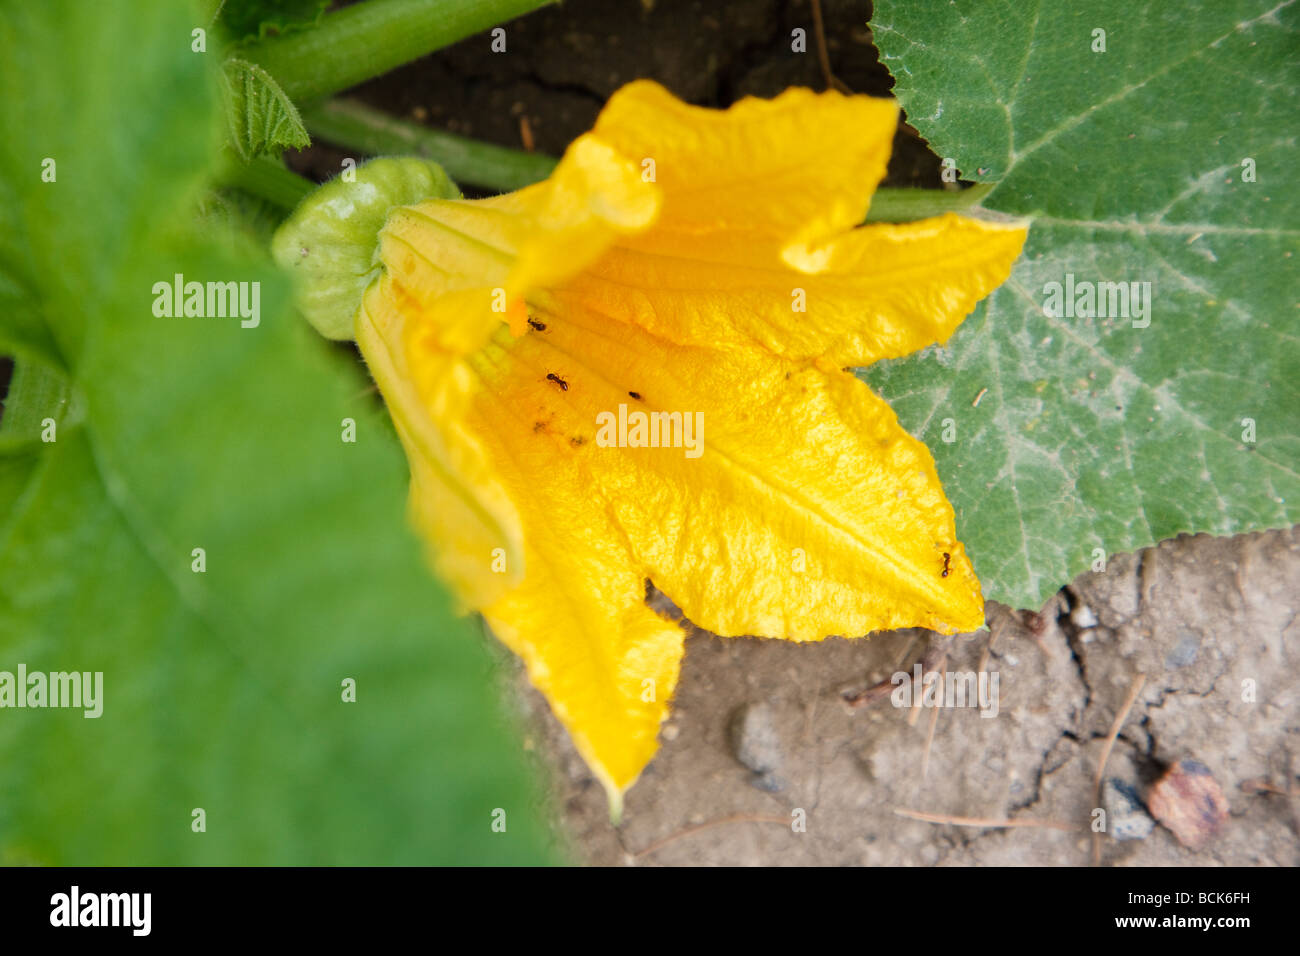 July 2009 Young Turban squash with flower bud Stock Photo